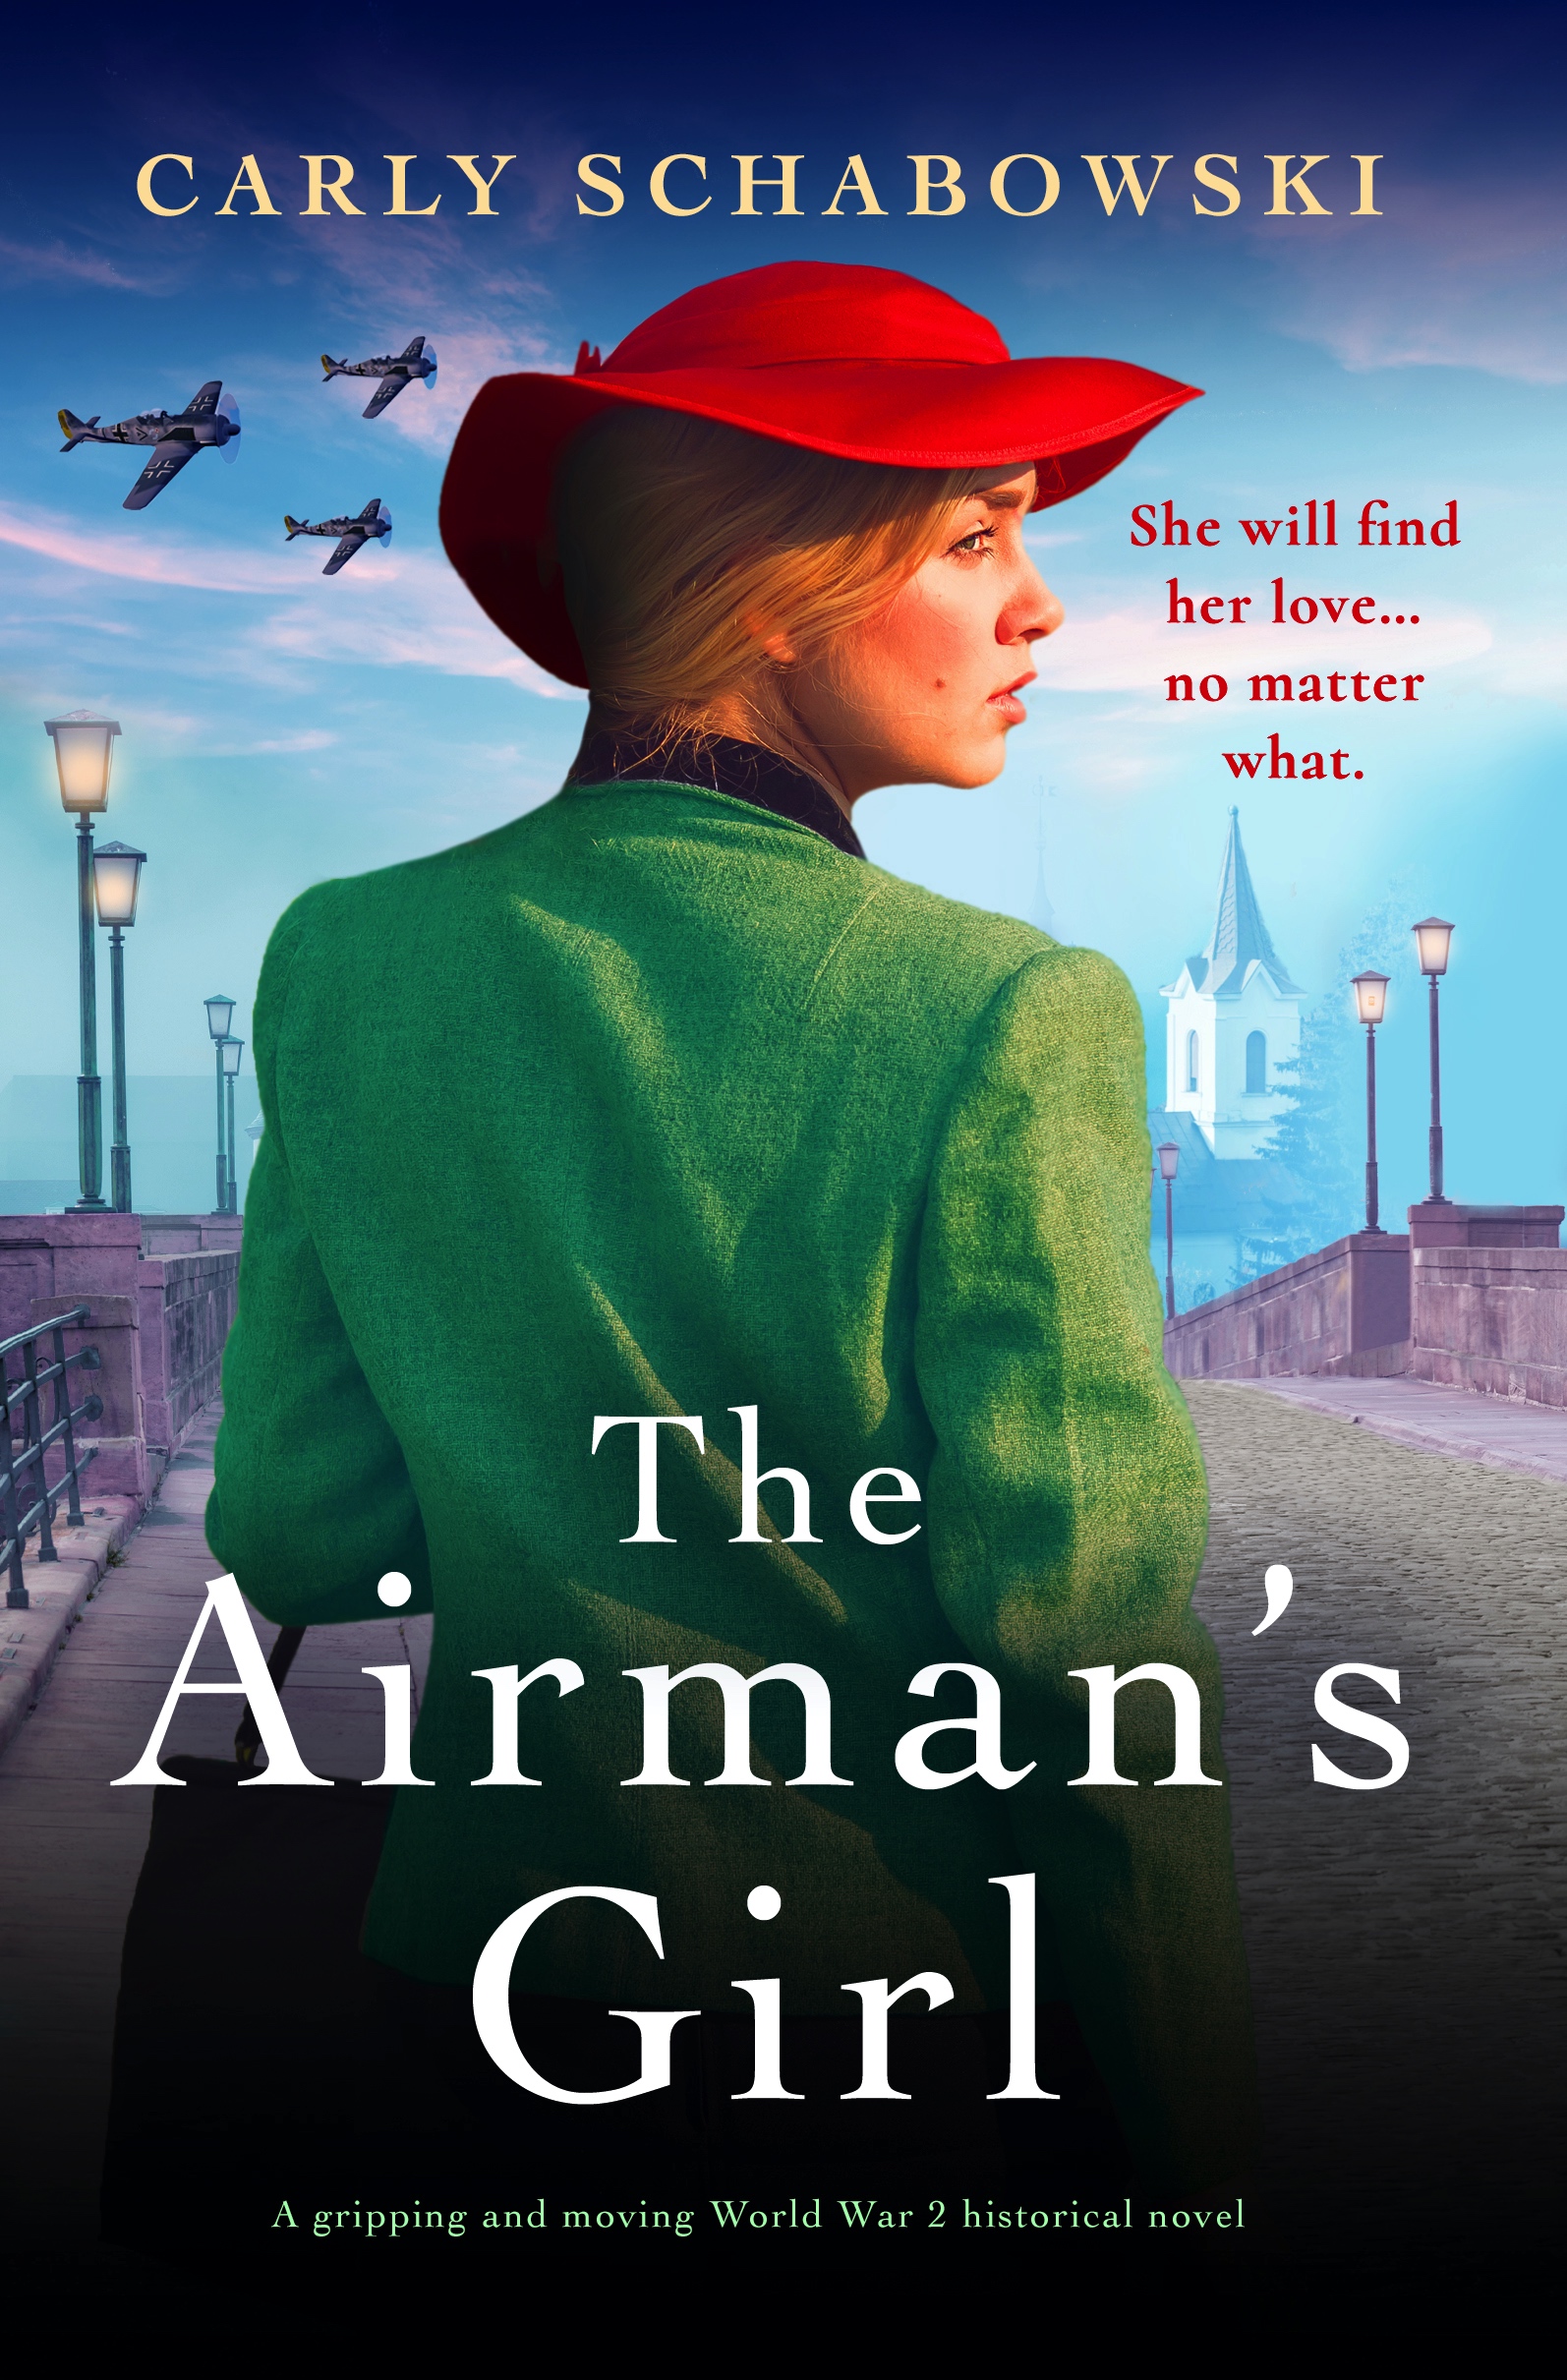 The Airman's Girl book cover